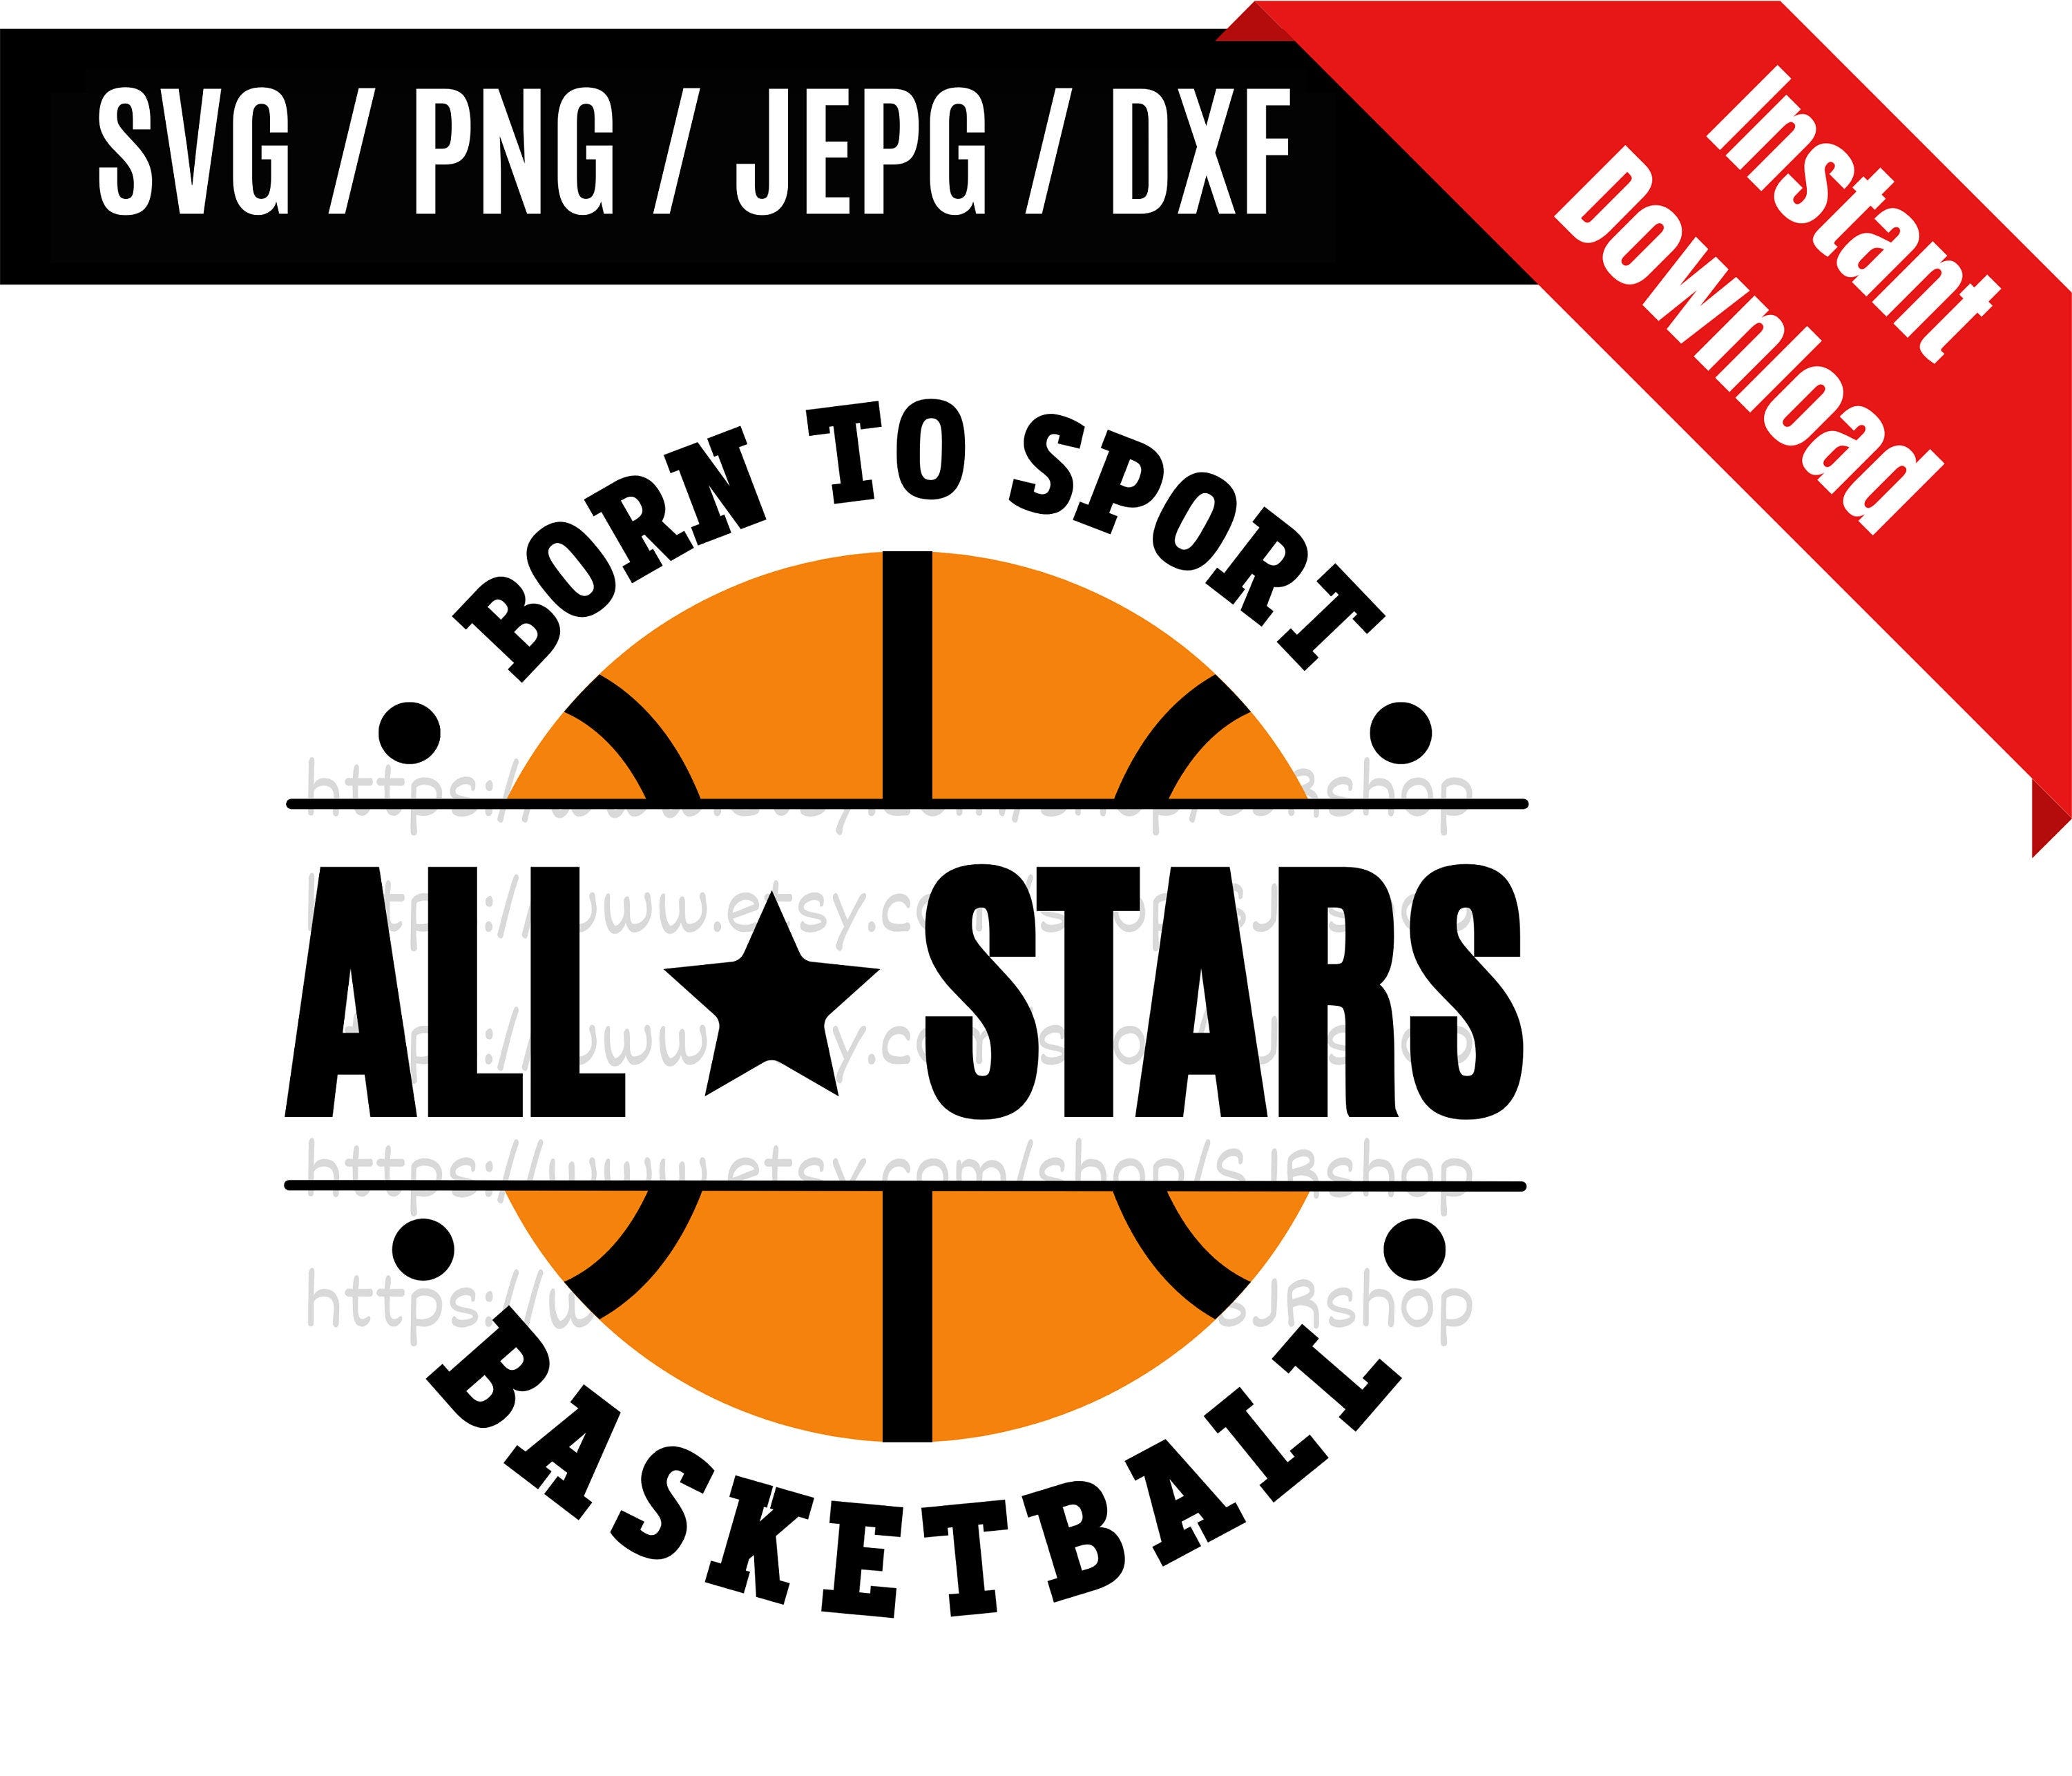 Born To Sport All Stars Basketball svg / All Stars svg / Basketball svg / Basketball All Star svg / Basketball SVG PNG dxf & jpeg Print File